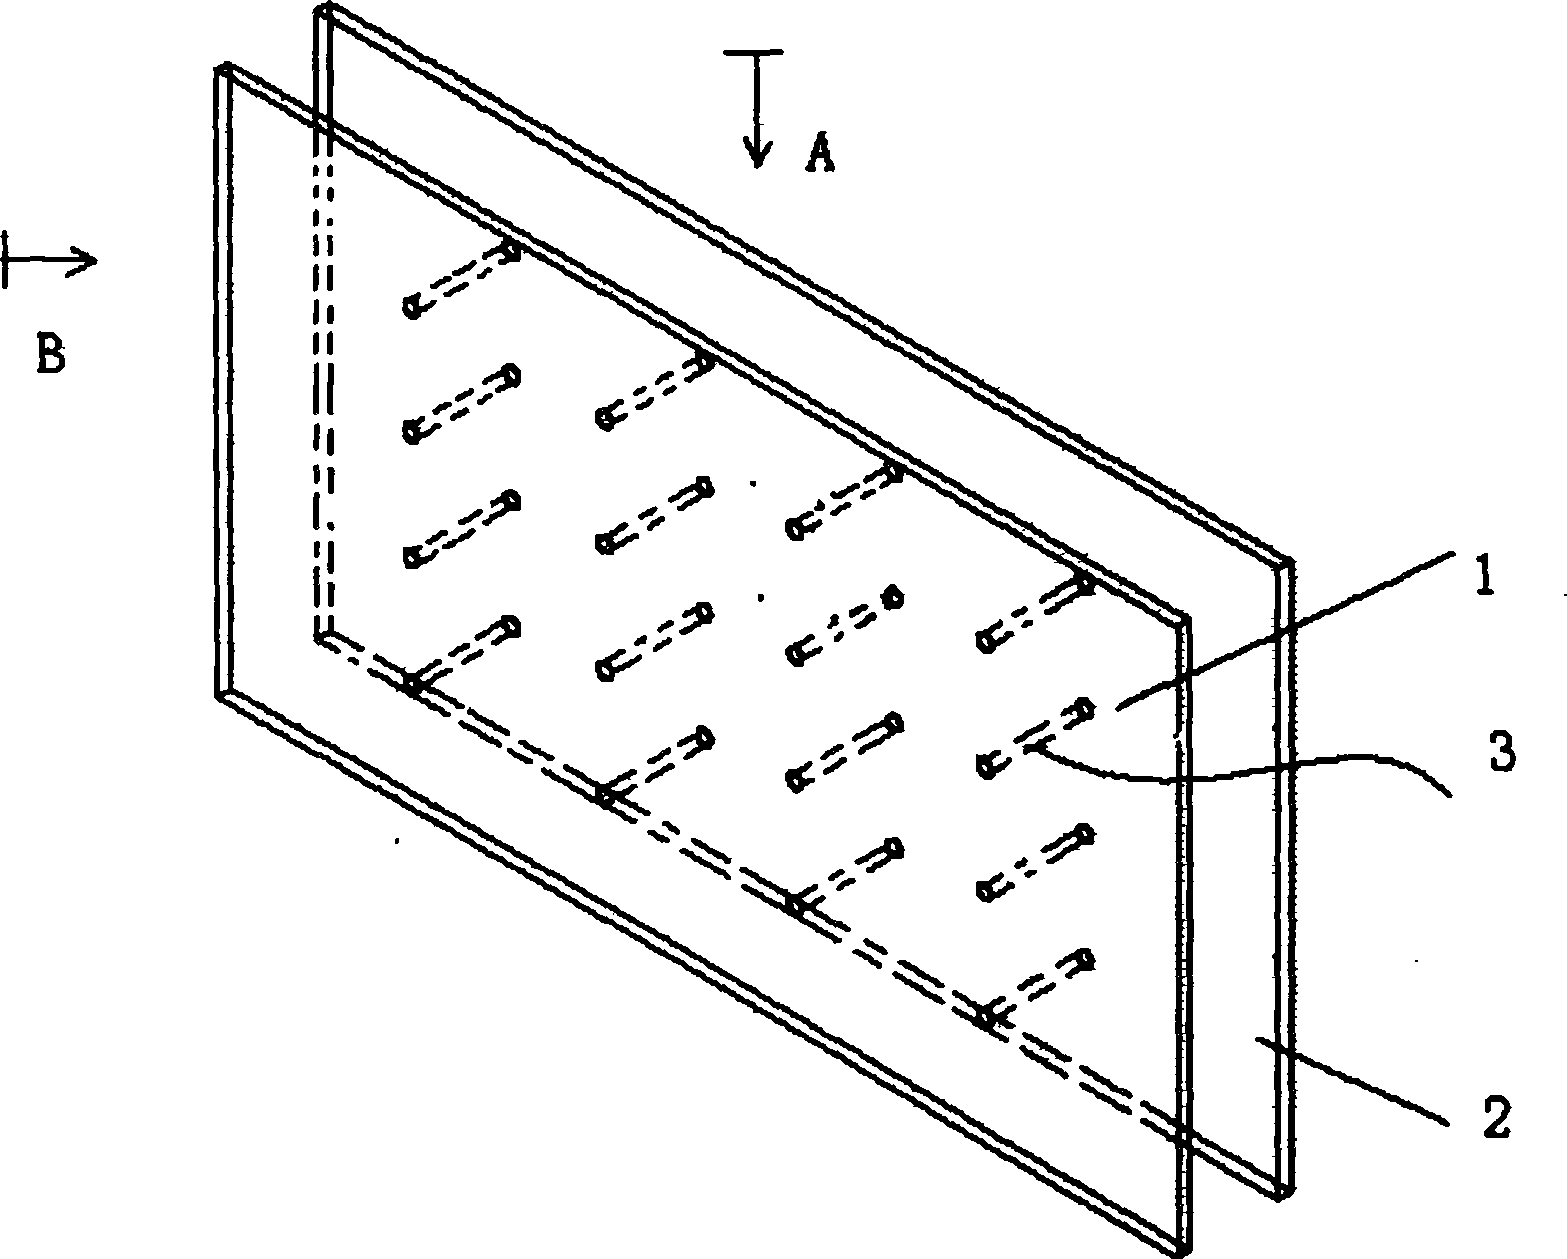 Field electron emission flat panel display supporting structure